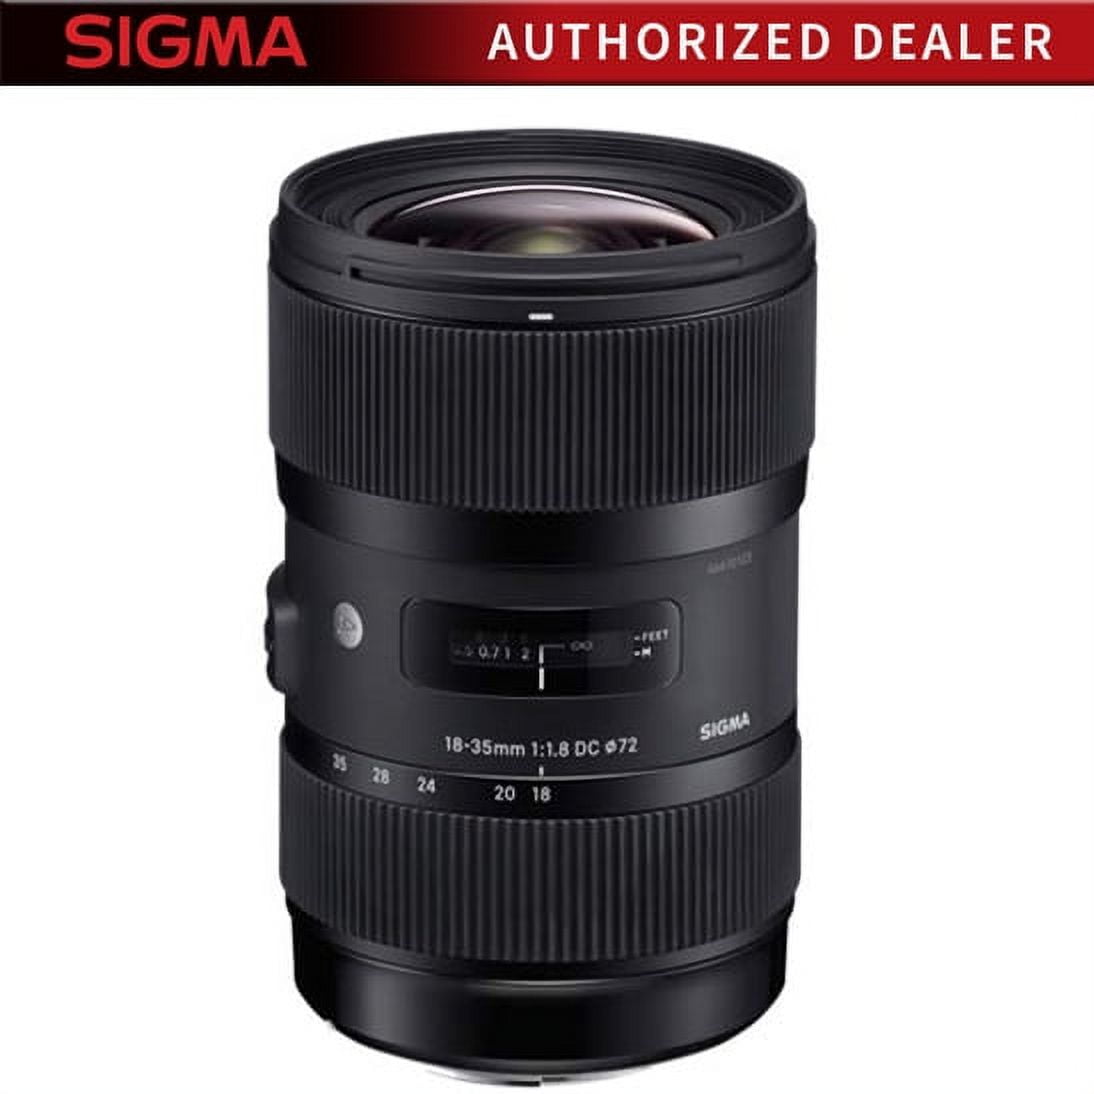 Sigma 210205 18-35mm F1.8 DC HSM Lens for Sony APS-C 